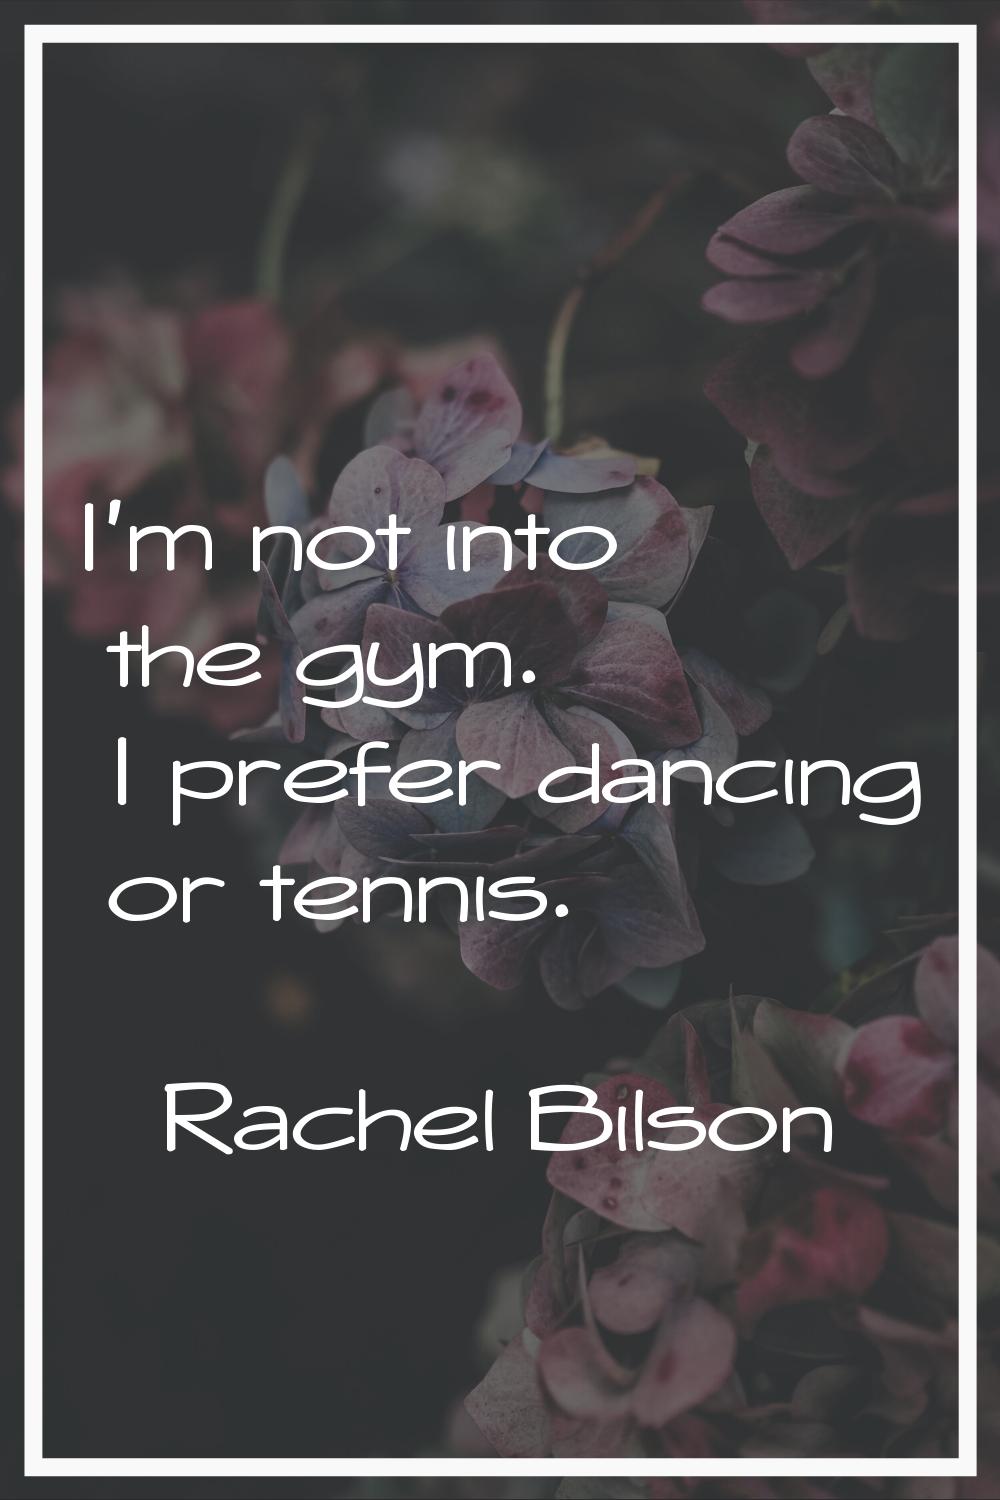 I'm not into the gym. I prefer dancing or tennis.